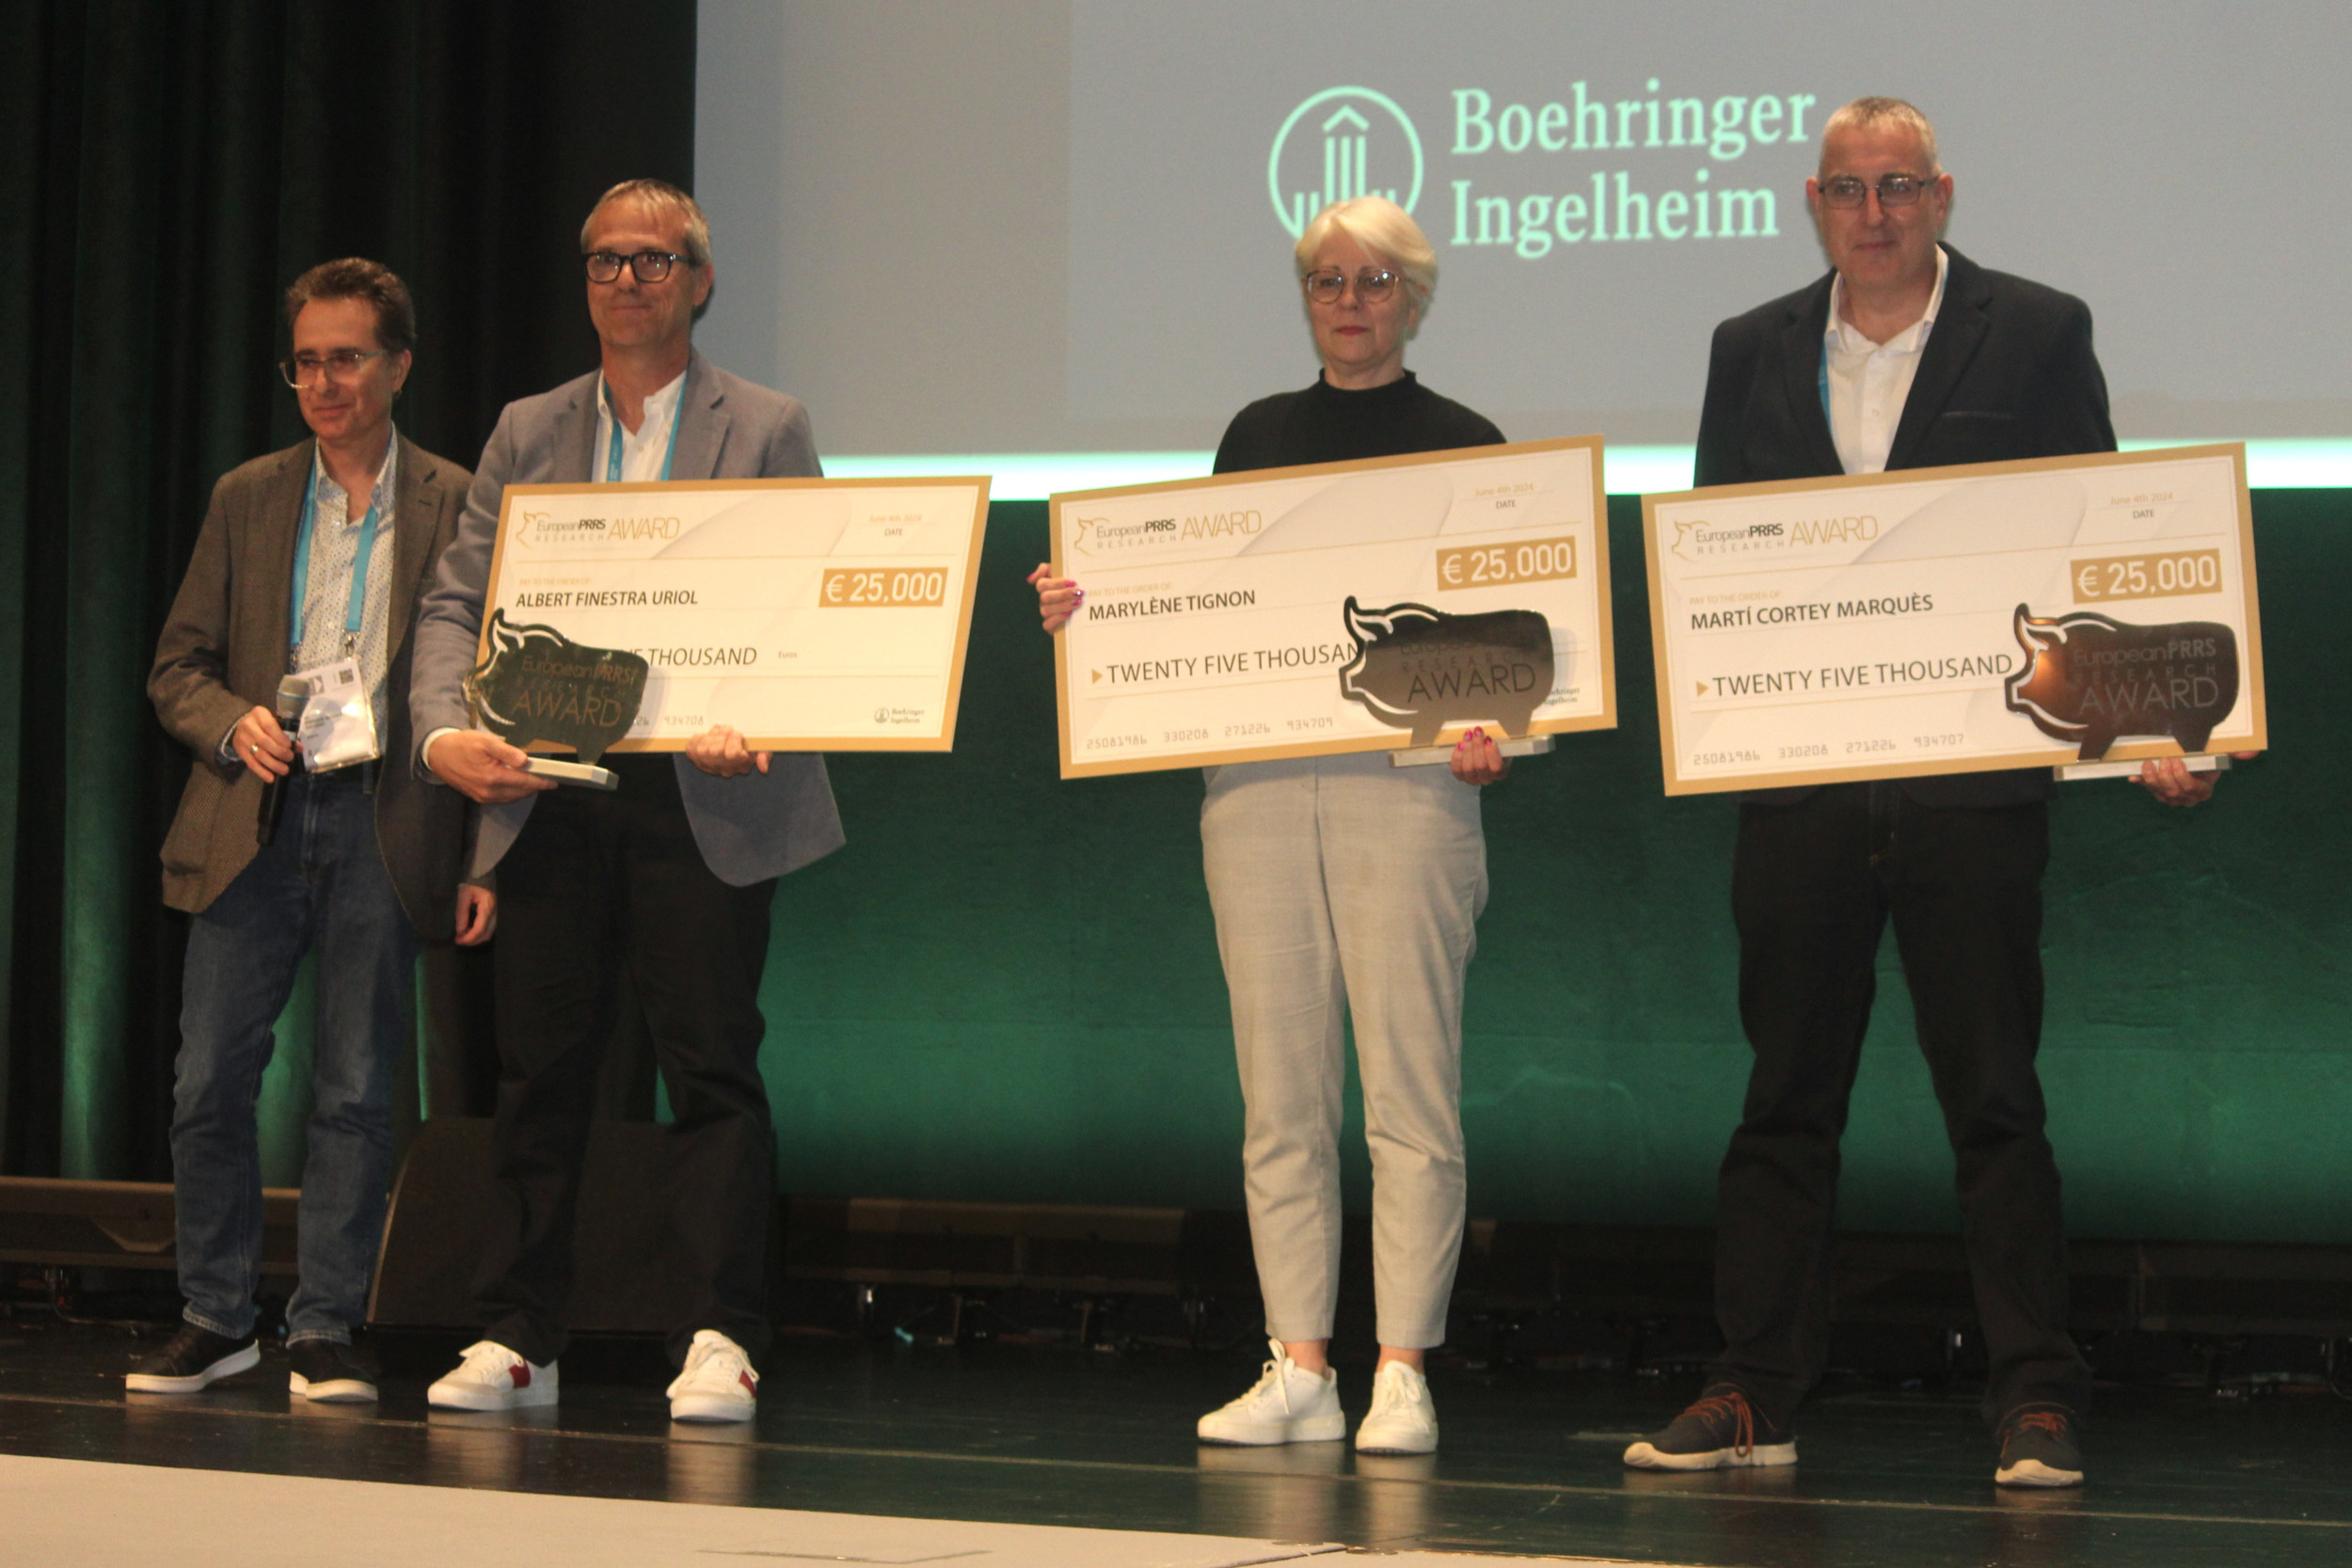 The 3 prize winners of the European PRRS awards, with from left to right Albert Finestra Uriol, Marylène Tignon and Marti Cortey Marqués.